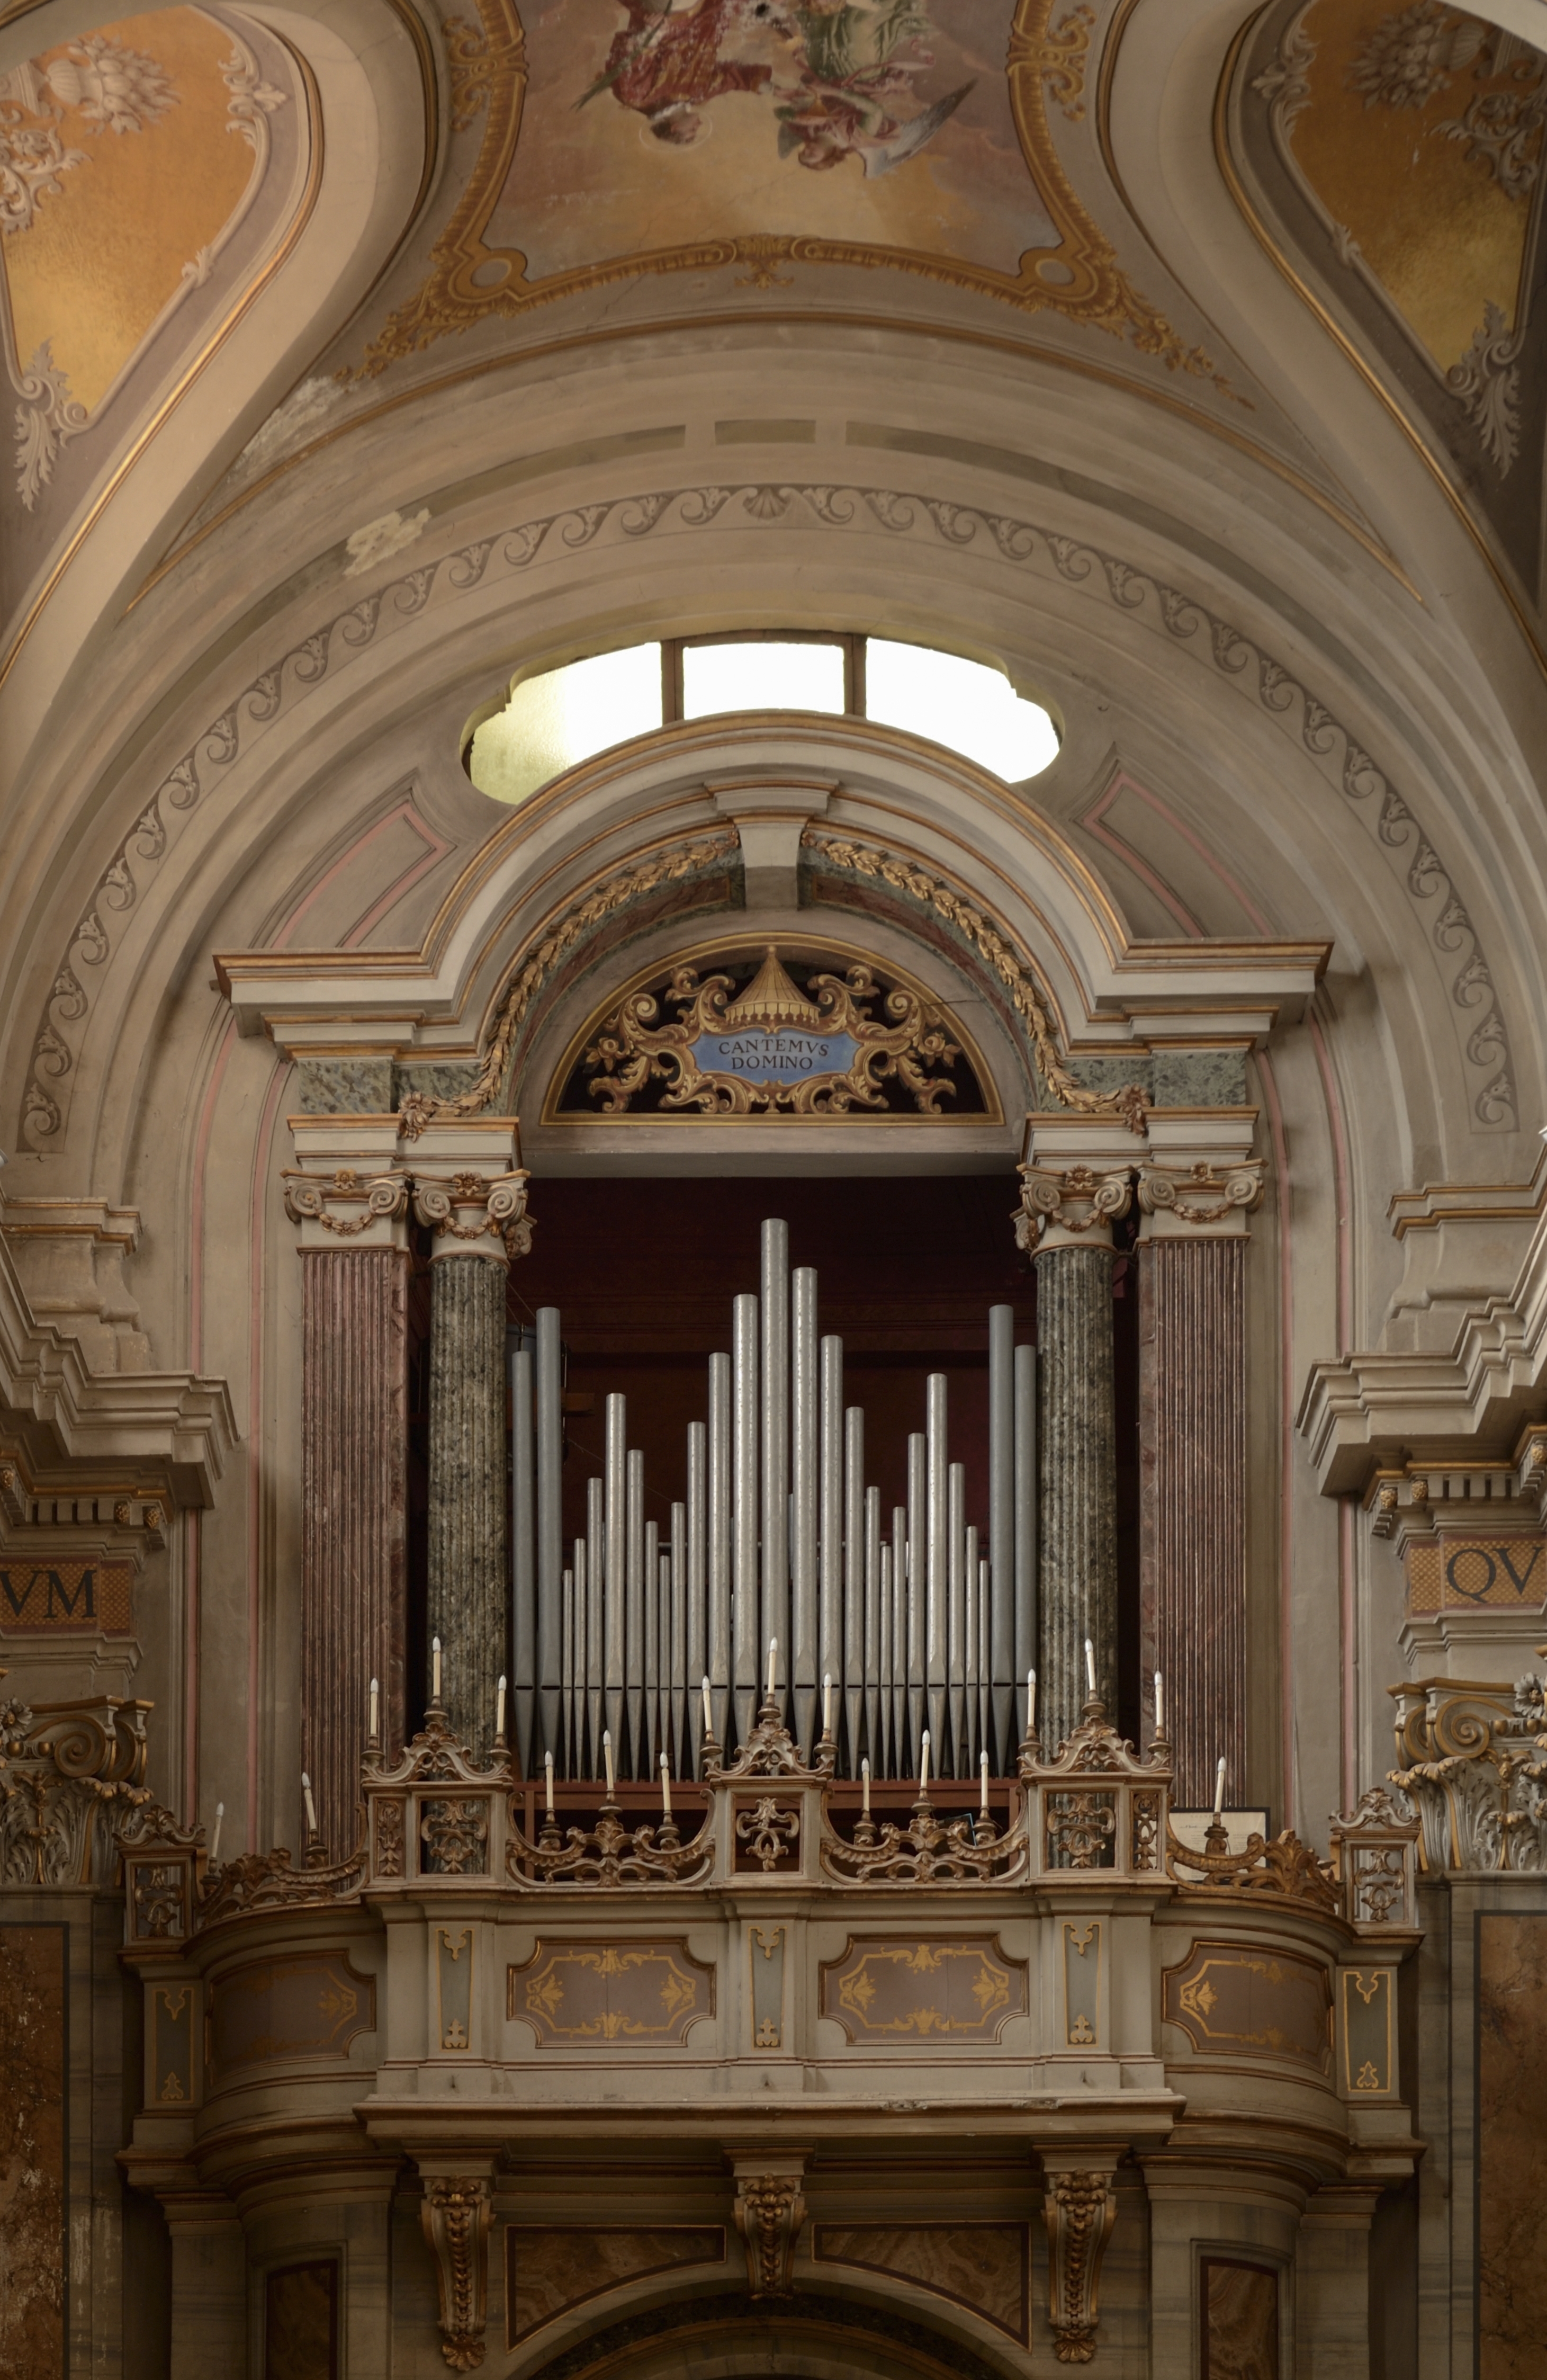 Pipe organ of the cathedral in Sutri